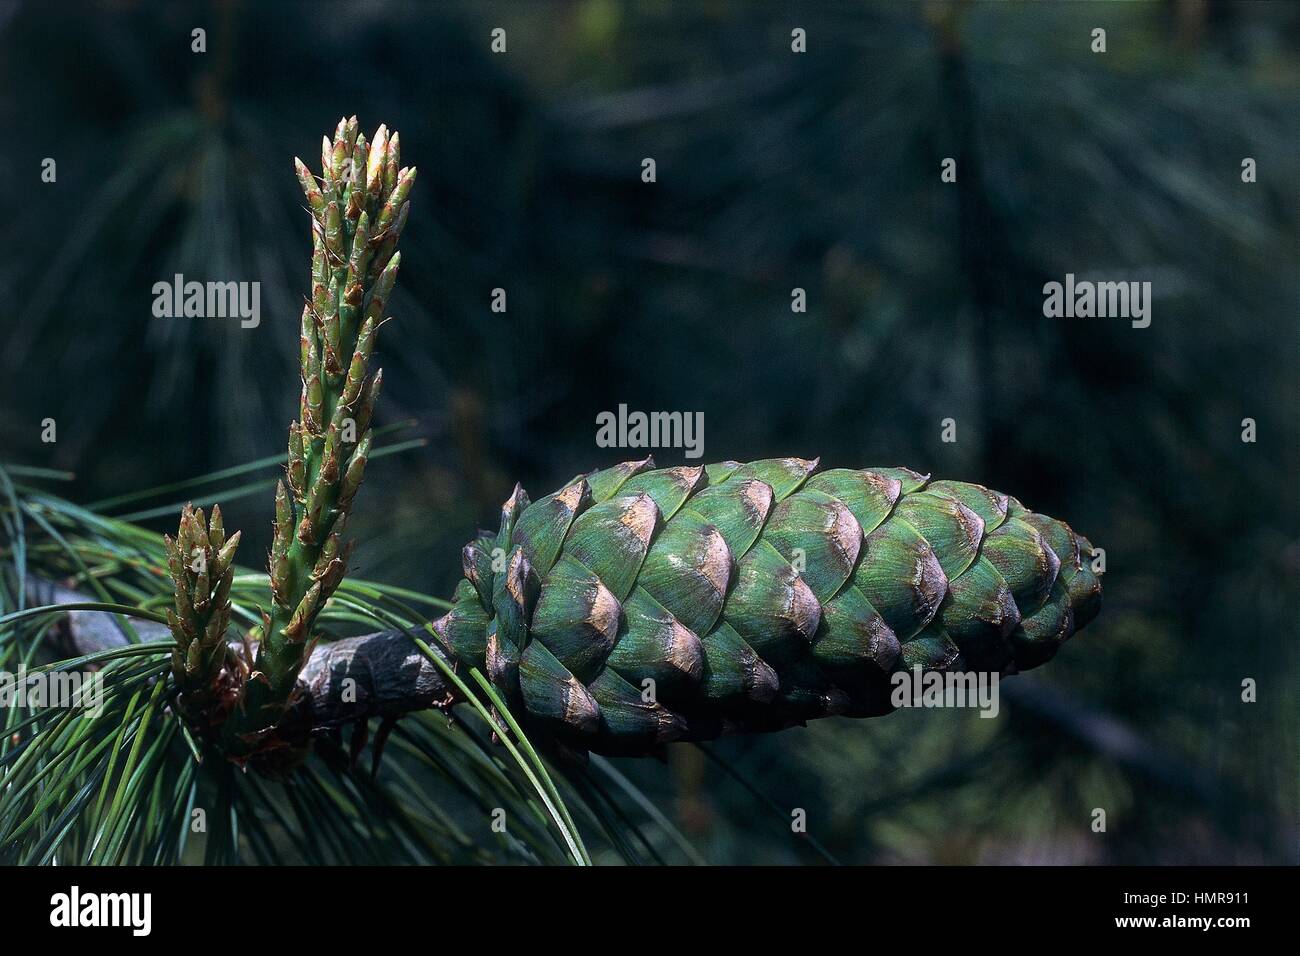 Leaves and strobilus of Chinese White Pine (Pinus armandii), Pinaceae. Stock Photo